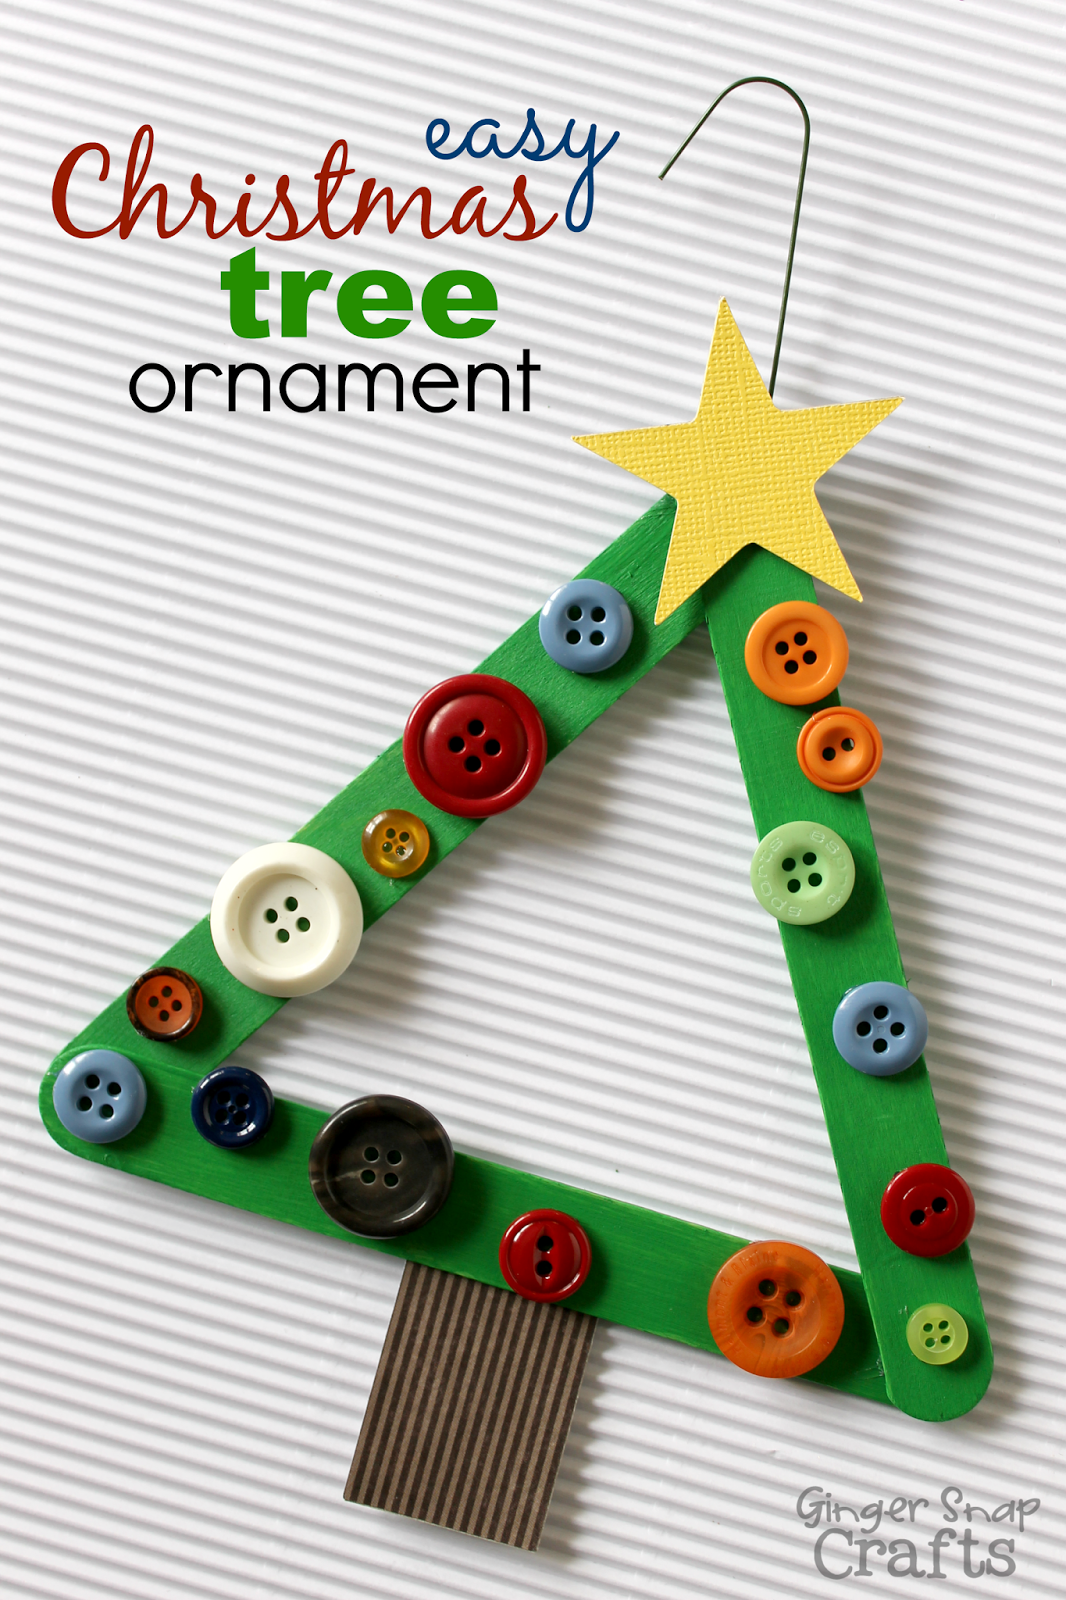 ... ornament ideas check out these posts easy christmas tree ornament